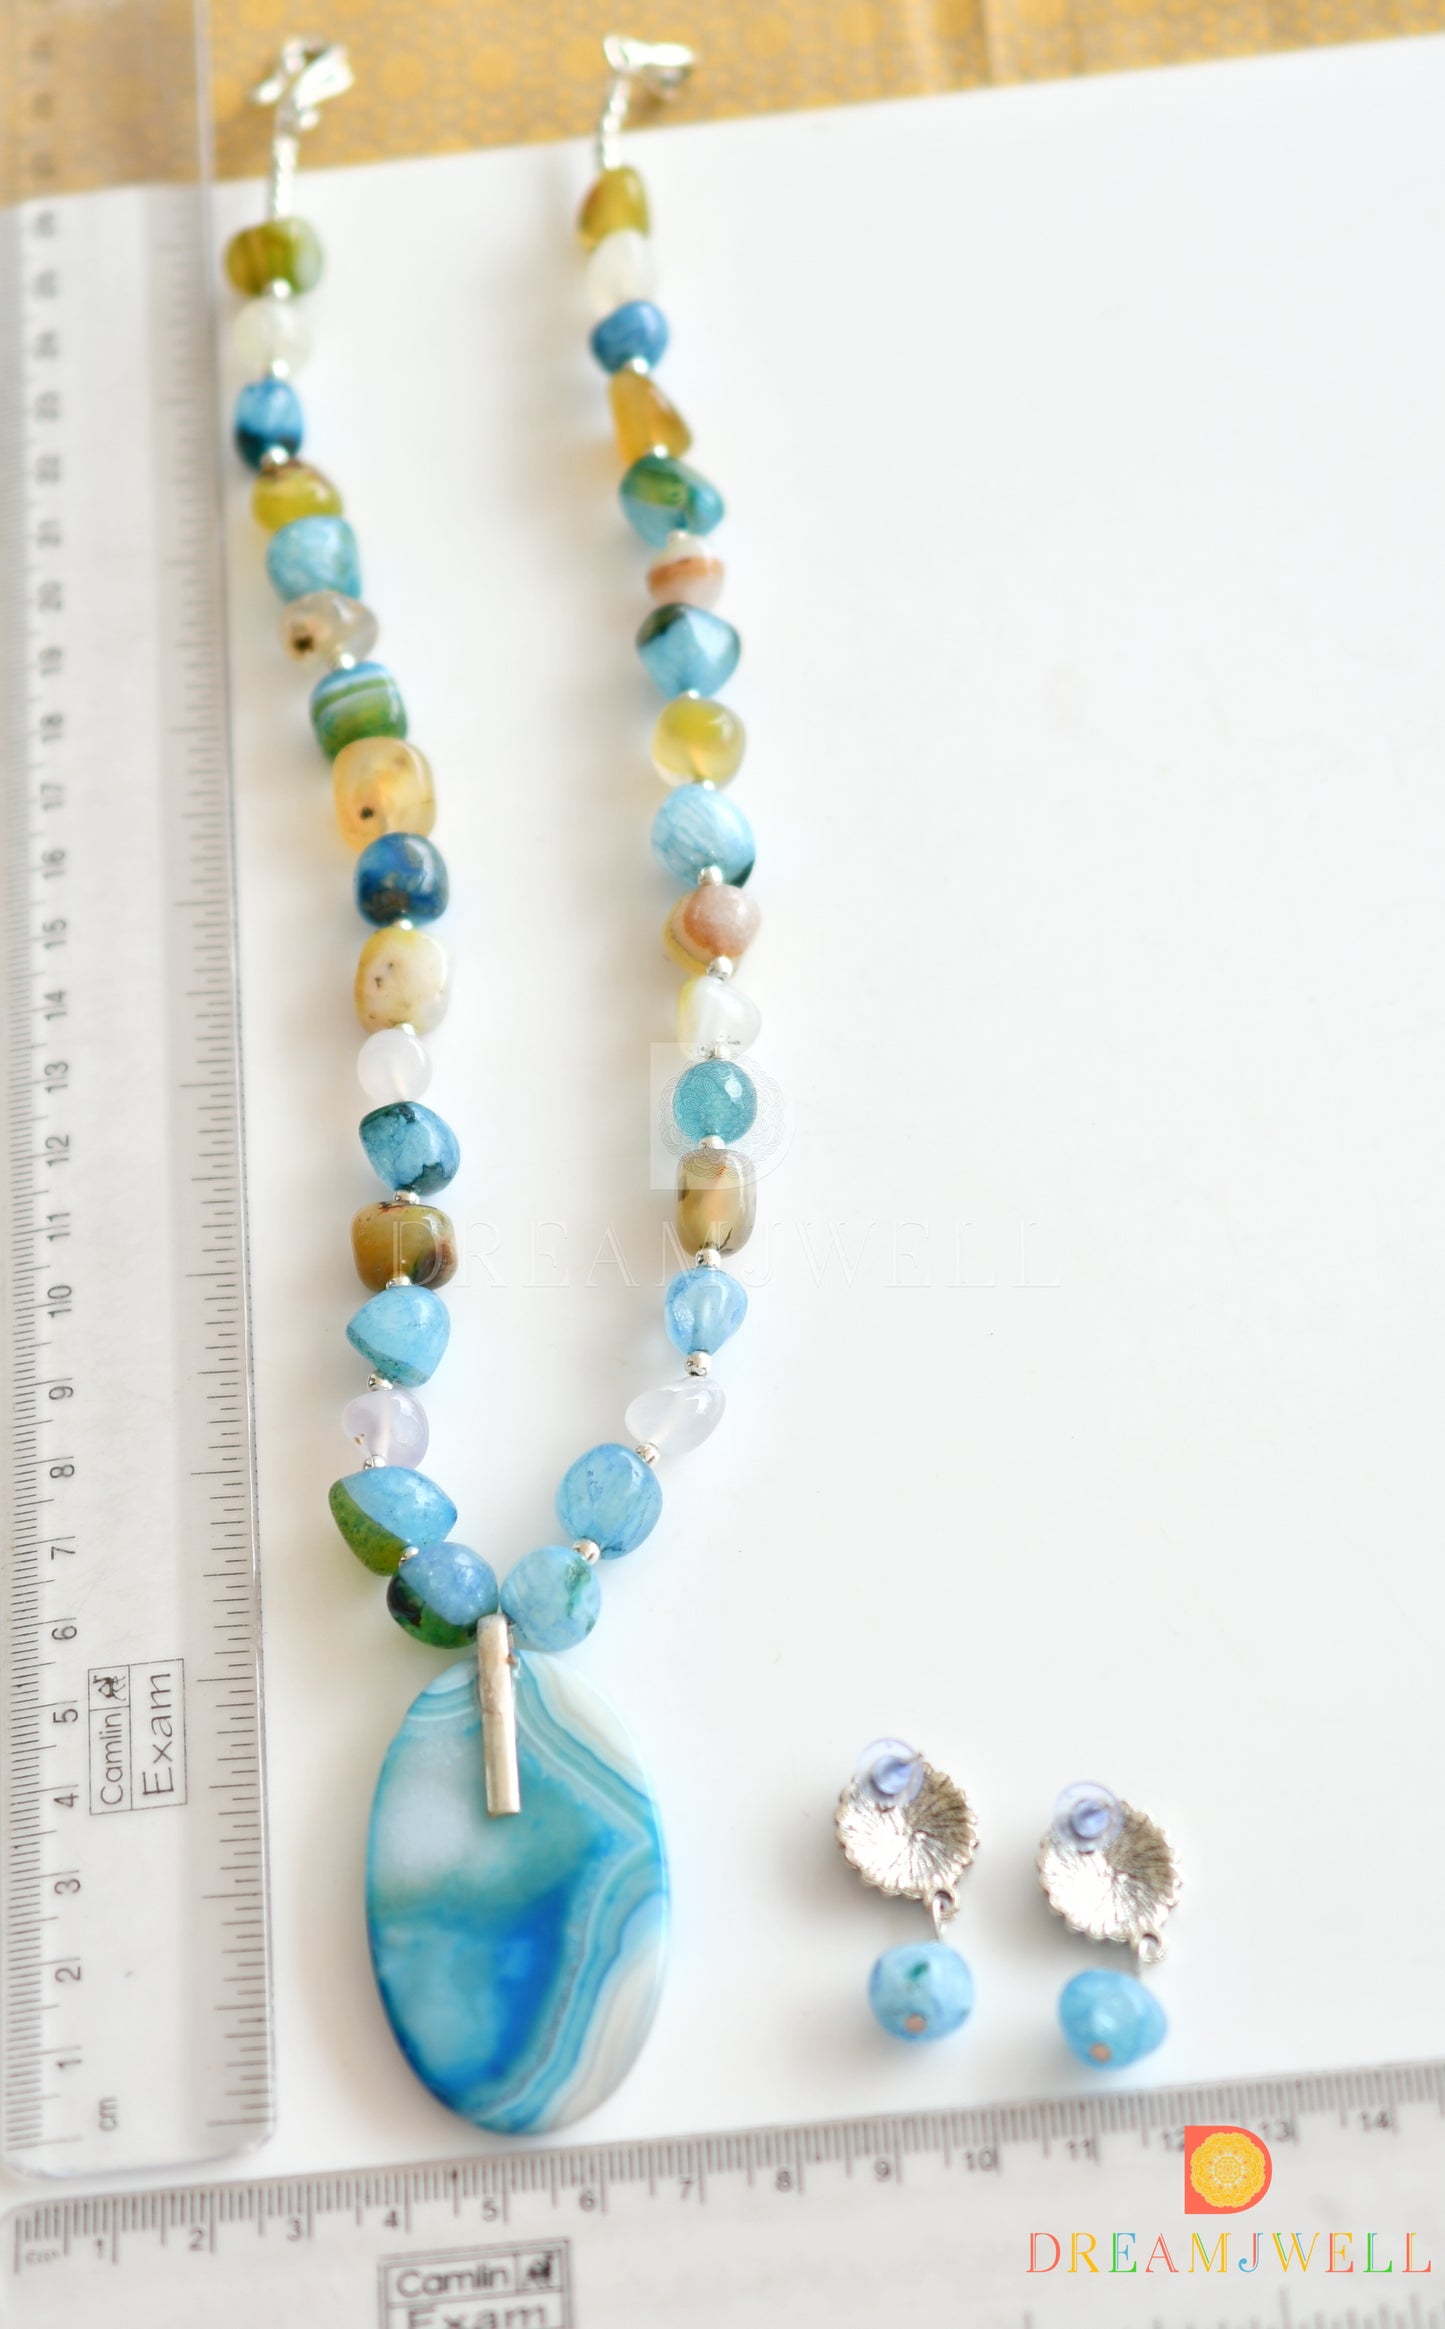 Silver tone sliced agate pendant with skyblue-green onyx beads necklace set dj-37170